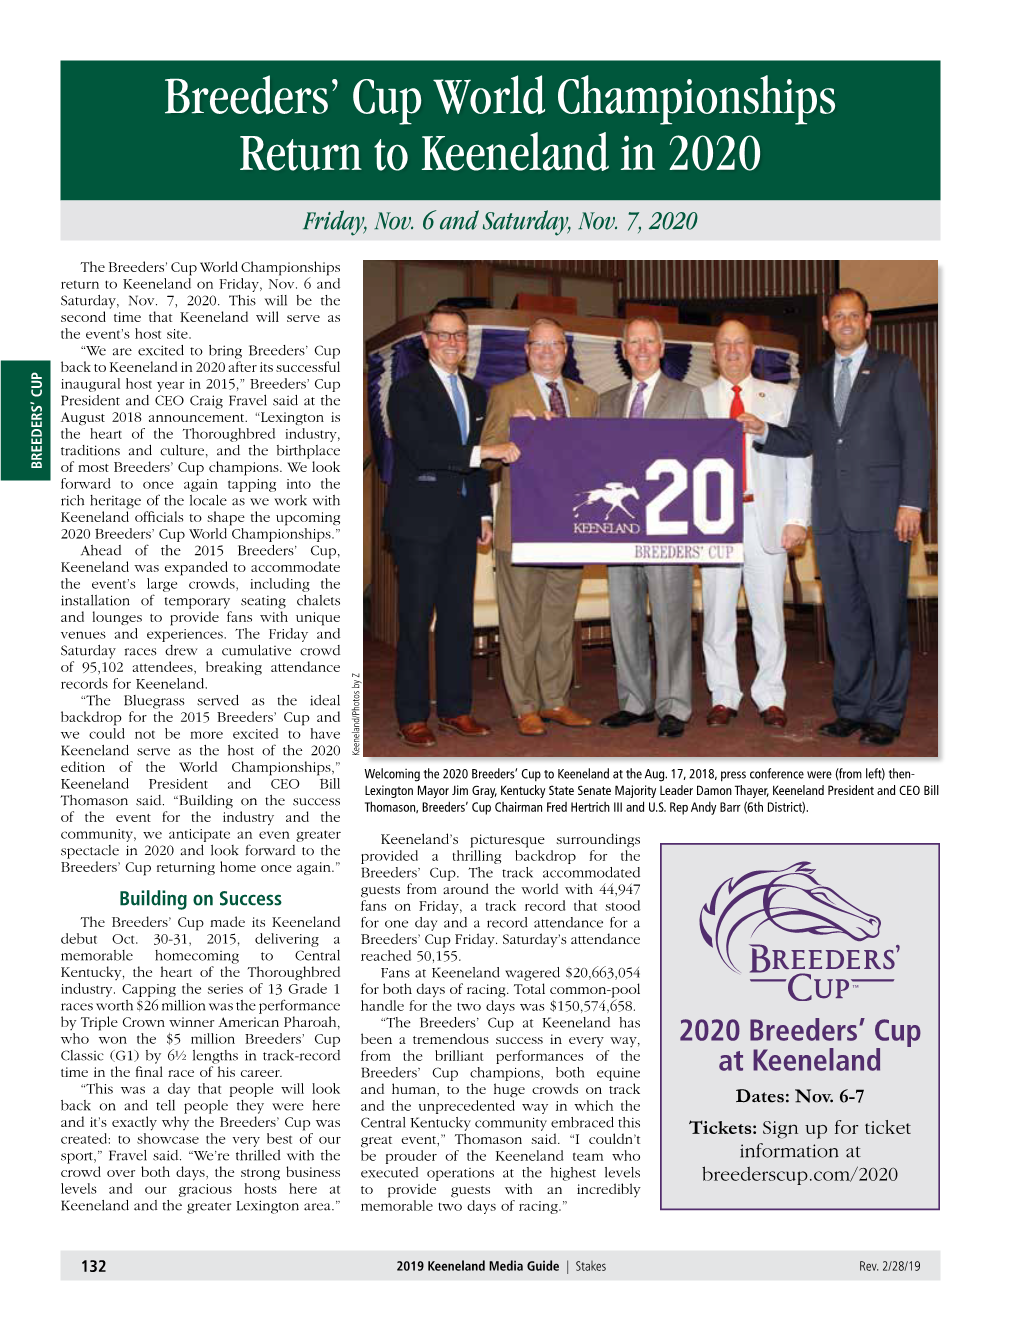 Breeders' Cup World Championships Return to Keeneland in 2020